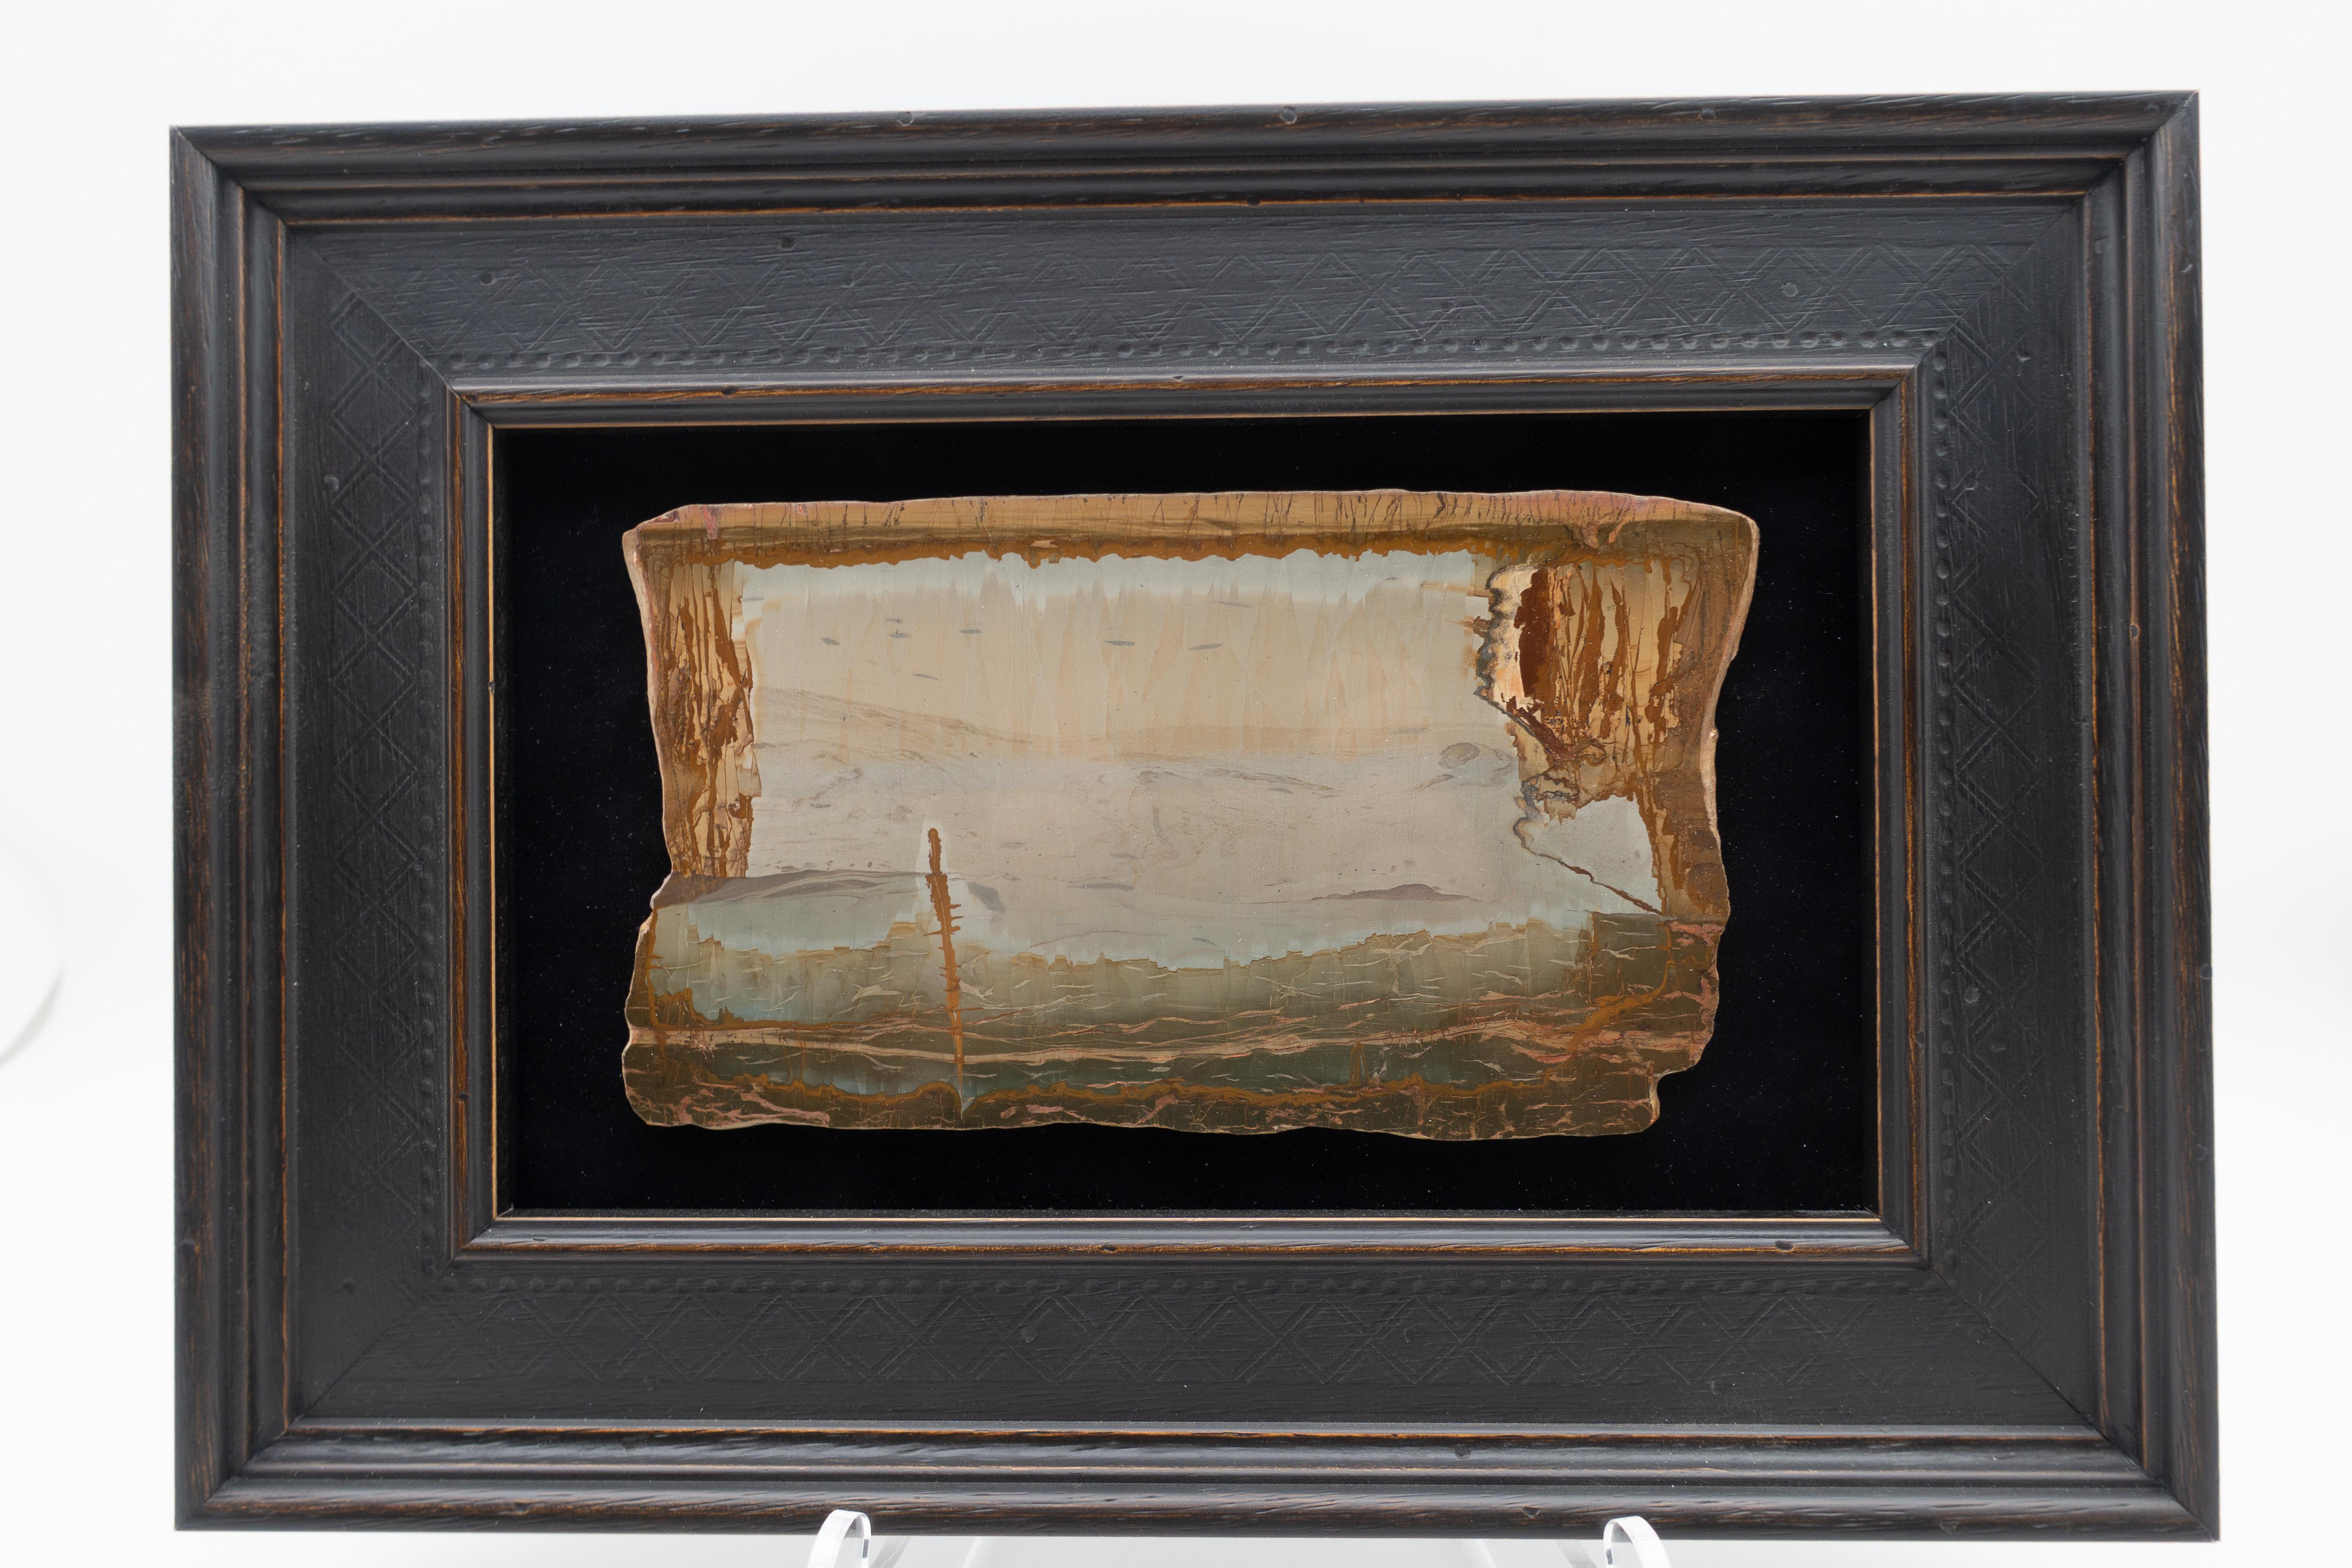 Framed slice of pietra paesina, also known as landscape stone or ruin marble. Pietra paesina is a kind of limestone or marble originating mostly from Florence territory whose natural appearance gives the impression of a ruined landscape painting. It